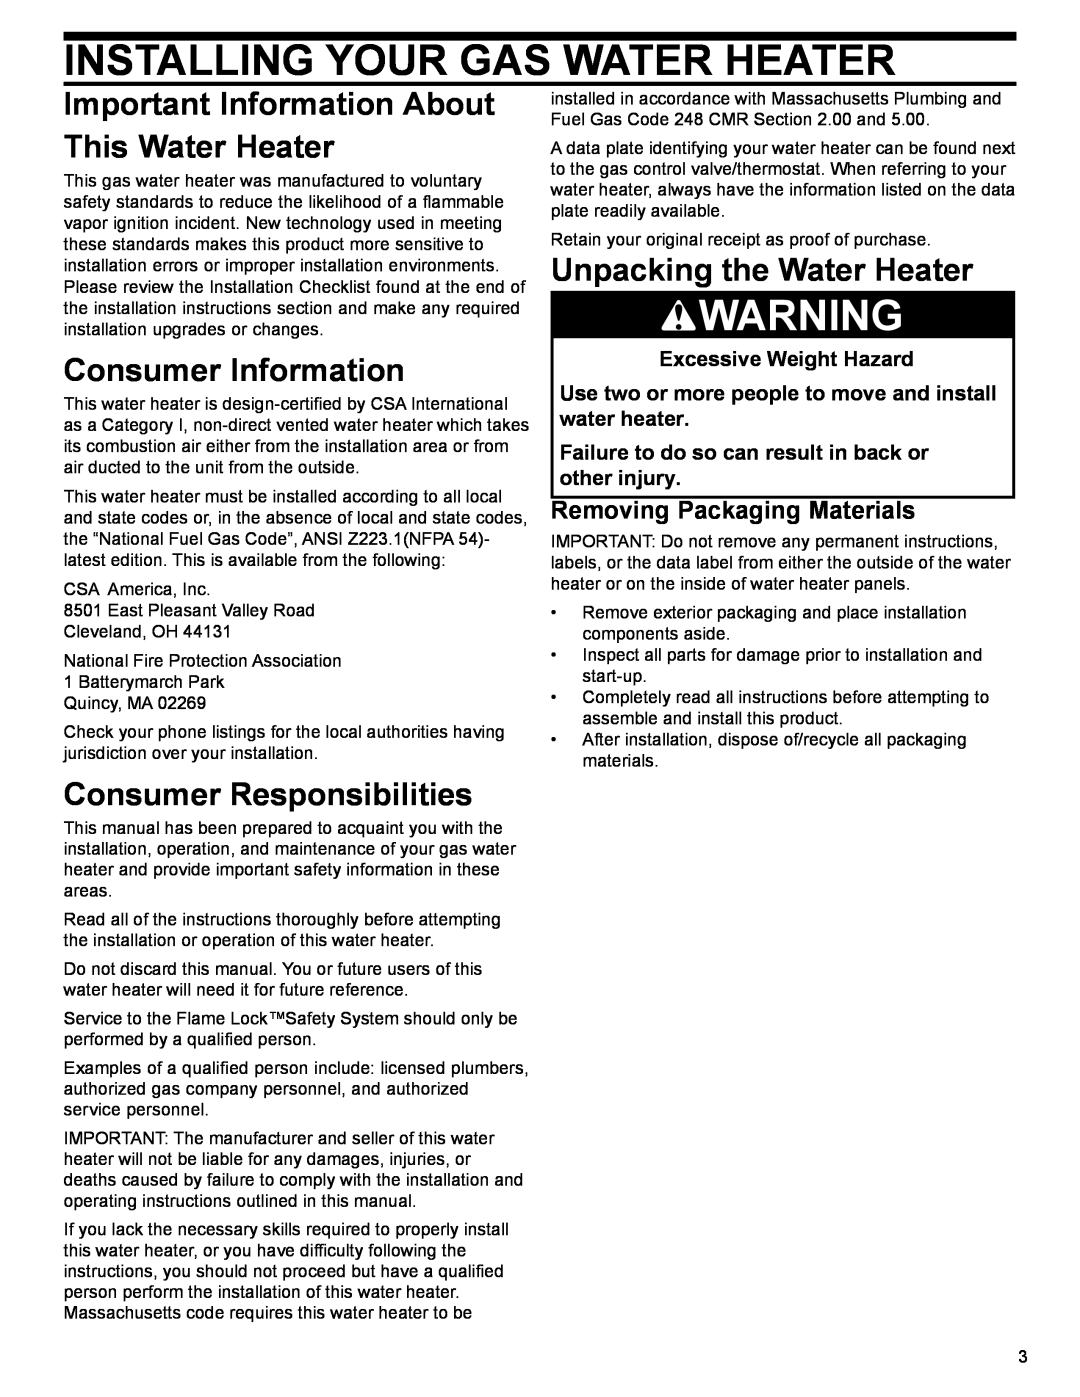 Whirlpool 285255 Installing Your Gas Water Heater, Important Information About This Water Heater, Consumer Information 